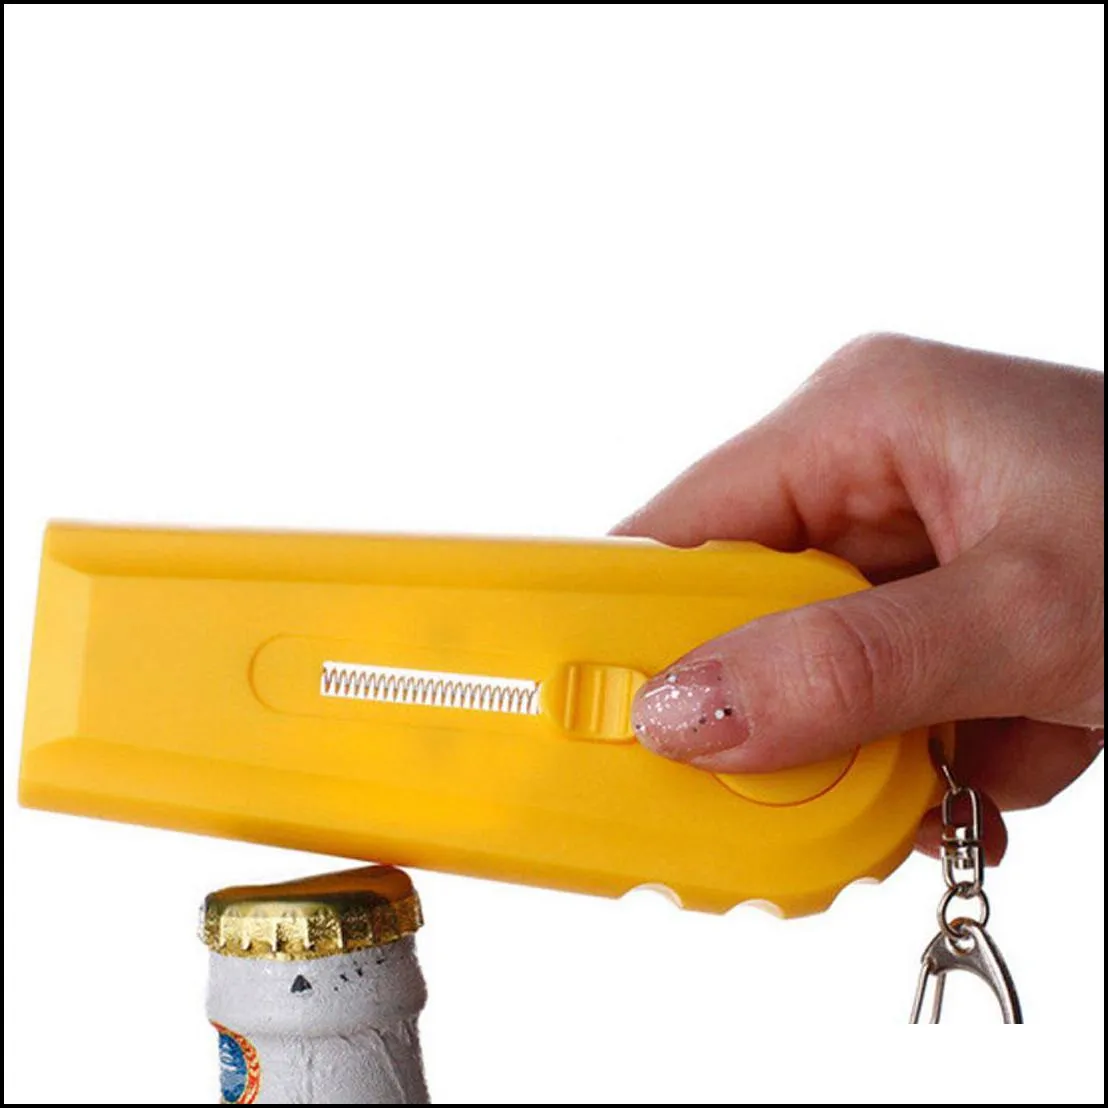 wholesale Cap Zappa Bottle Opening Creative Plastic Ejection Beer Bottle Opener Kitchen Tool with Handy Key Chain Party RRD6893